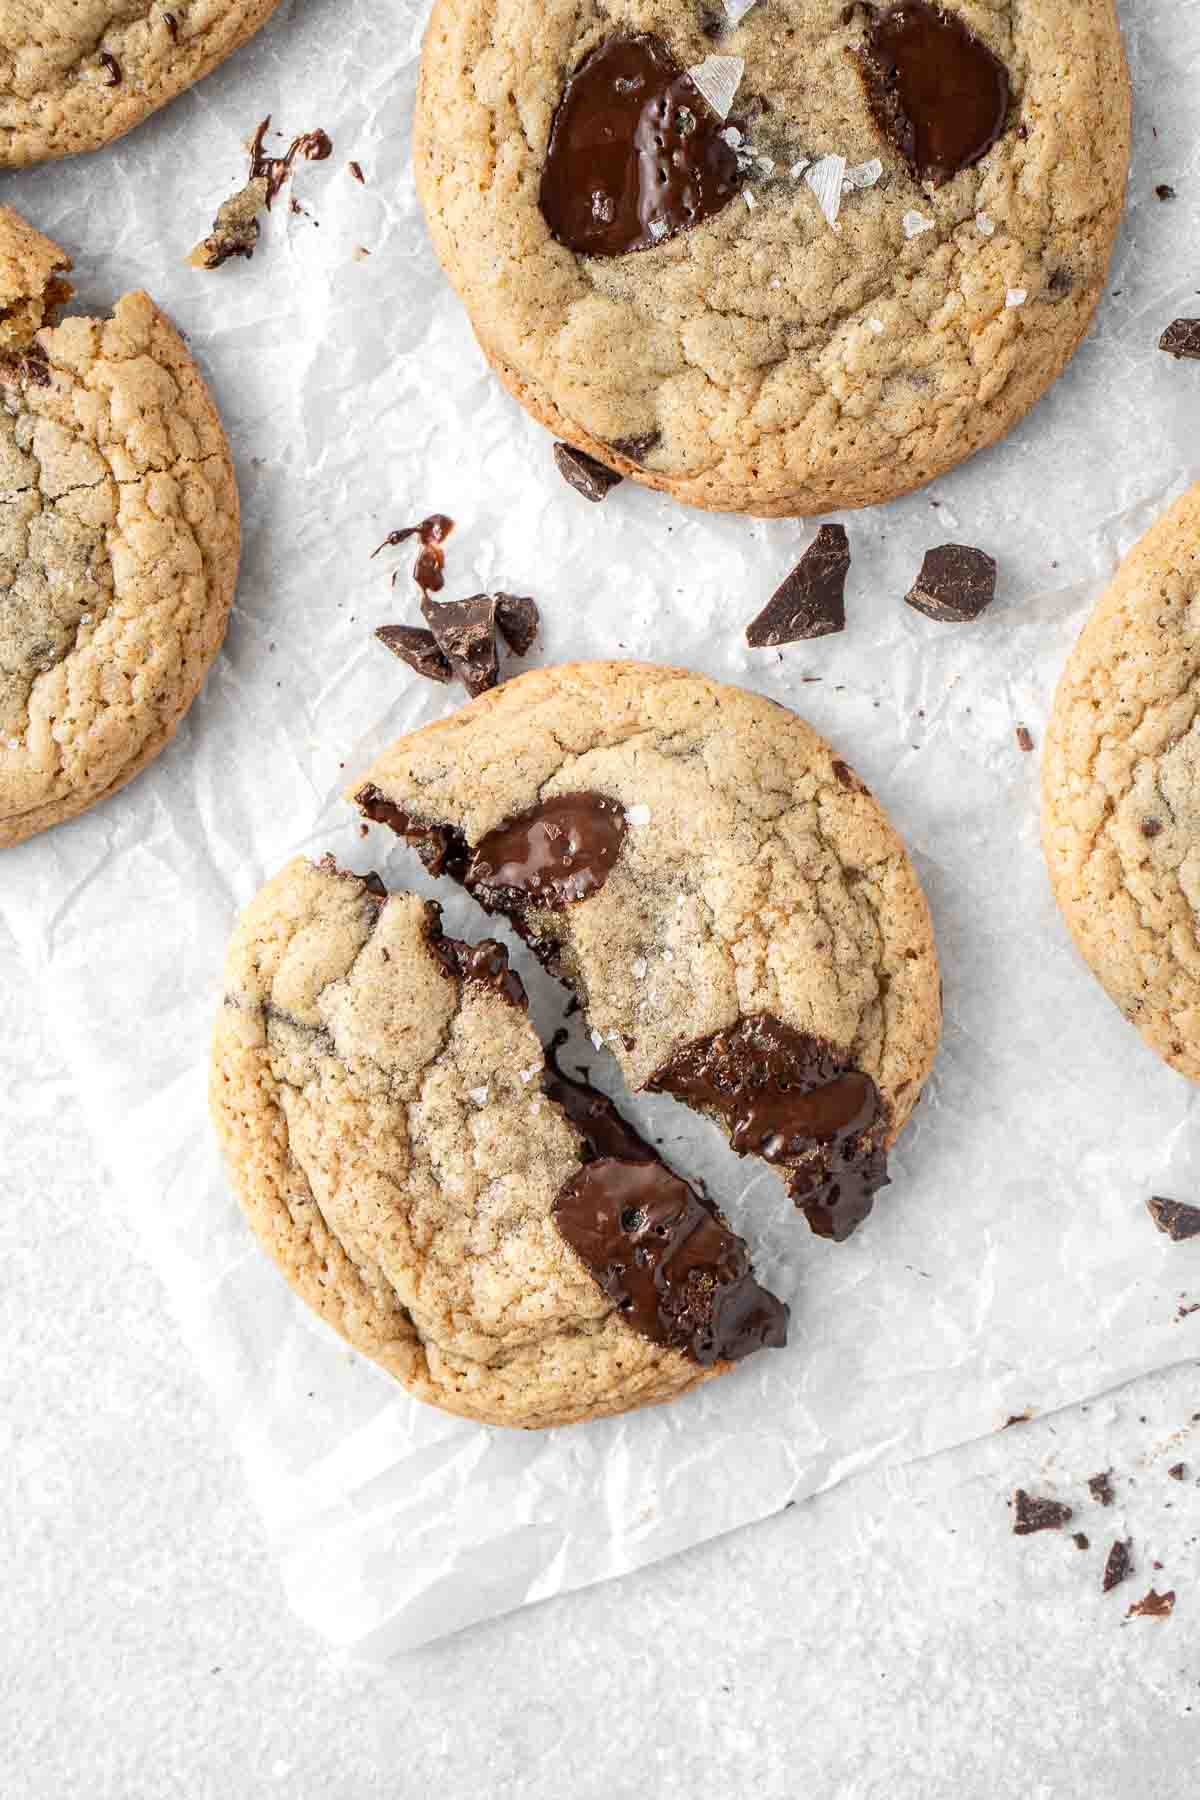 Close up of a dairy free chocolate chip cookie broken in half.